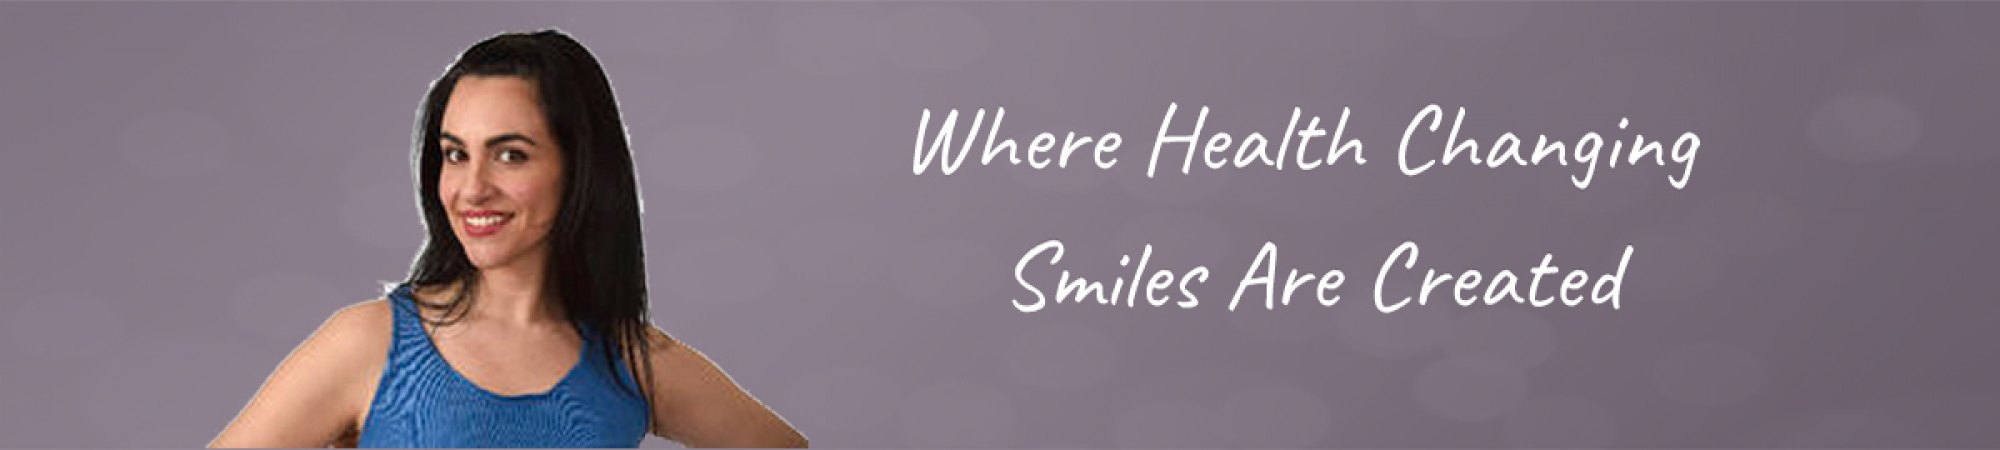 About Family Dentistry Associates of Monona